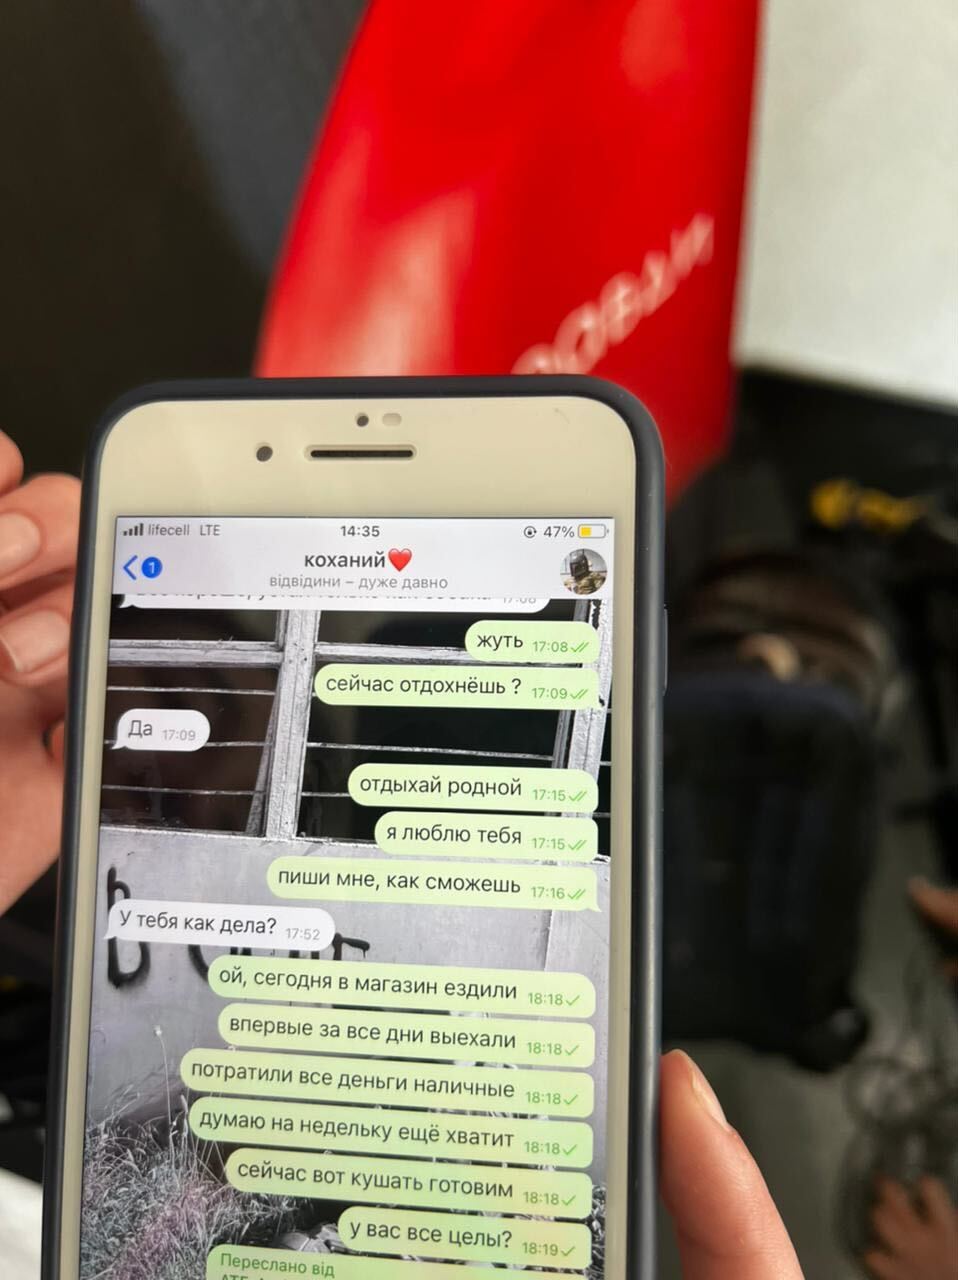 Nastya Bilousova shows a conversation she had with her boyfriend, Dmytro Chornyi, who was killed in the Azovstal plant in Mariupol, Ukraine. In the message, Chornyi tells Bilousova that he is getting a rest from fighting, and she tells him she loves him. She also told him that she went out for the first time in days to buy food.